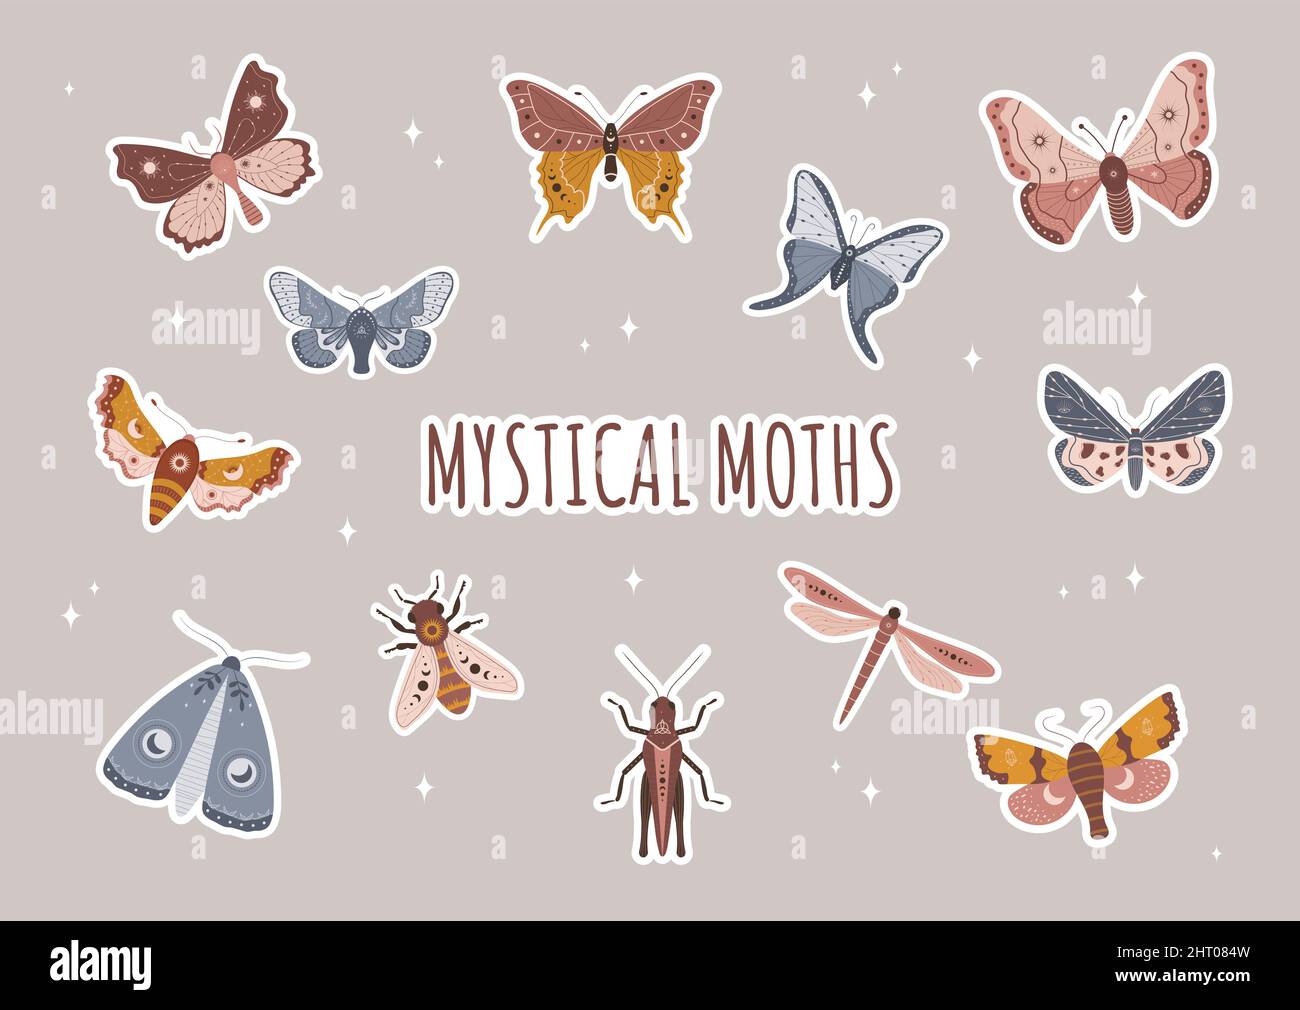 https://c8.alamy.com/comp/2HT084W/butterfly-sticker-collection-in-bohemian-style-cute-hand-drawn-moth-dragonfly-bee-and-grasshopper-isolated-boho-kids-clipart-vintage-celestial-2HT084W.jpg